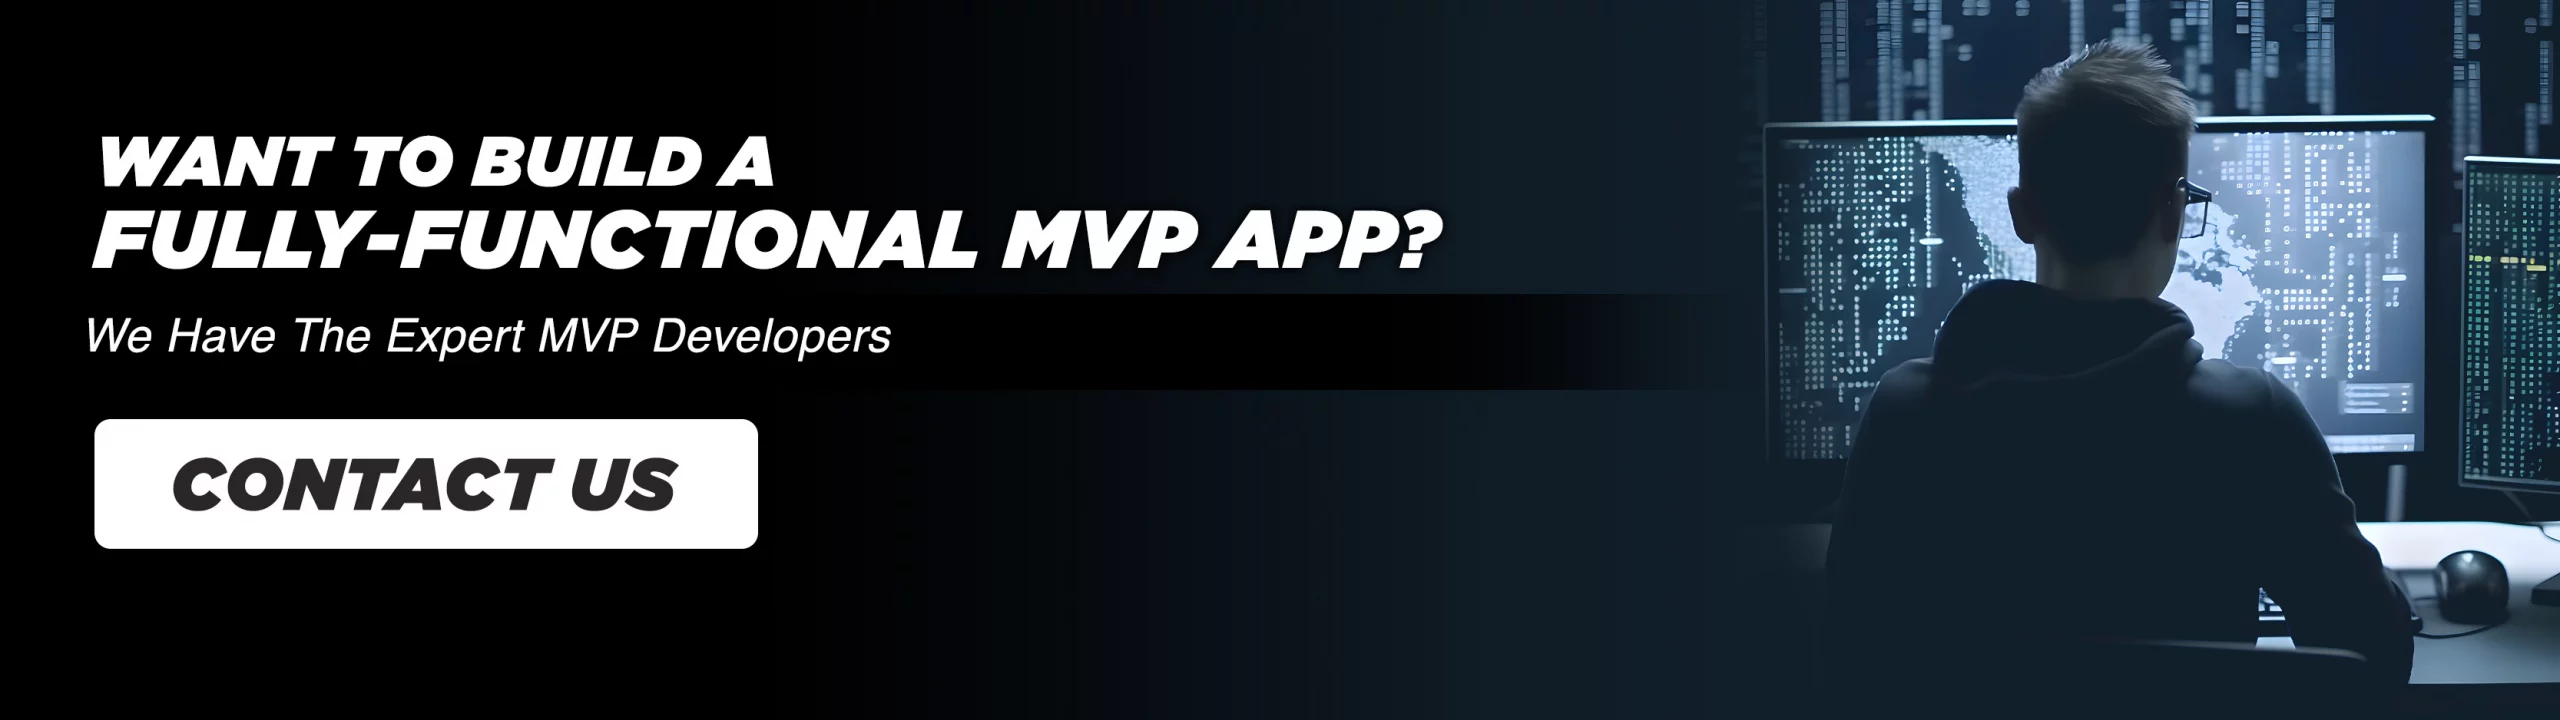 Want To Build a Fully-Functional MVP App - Contact Us